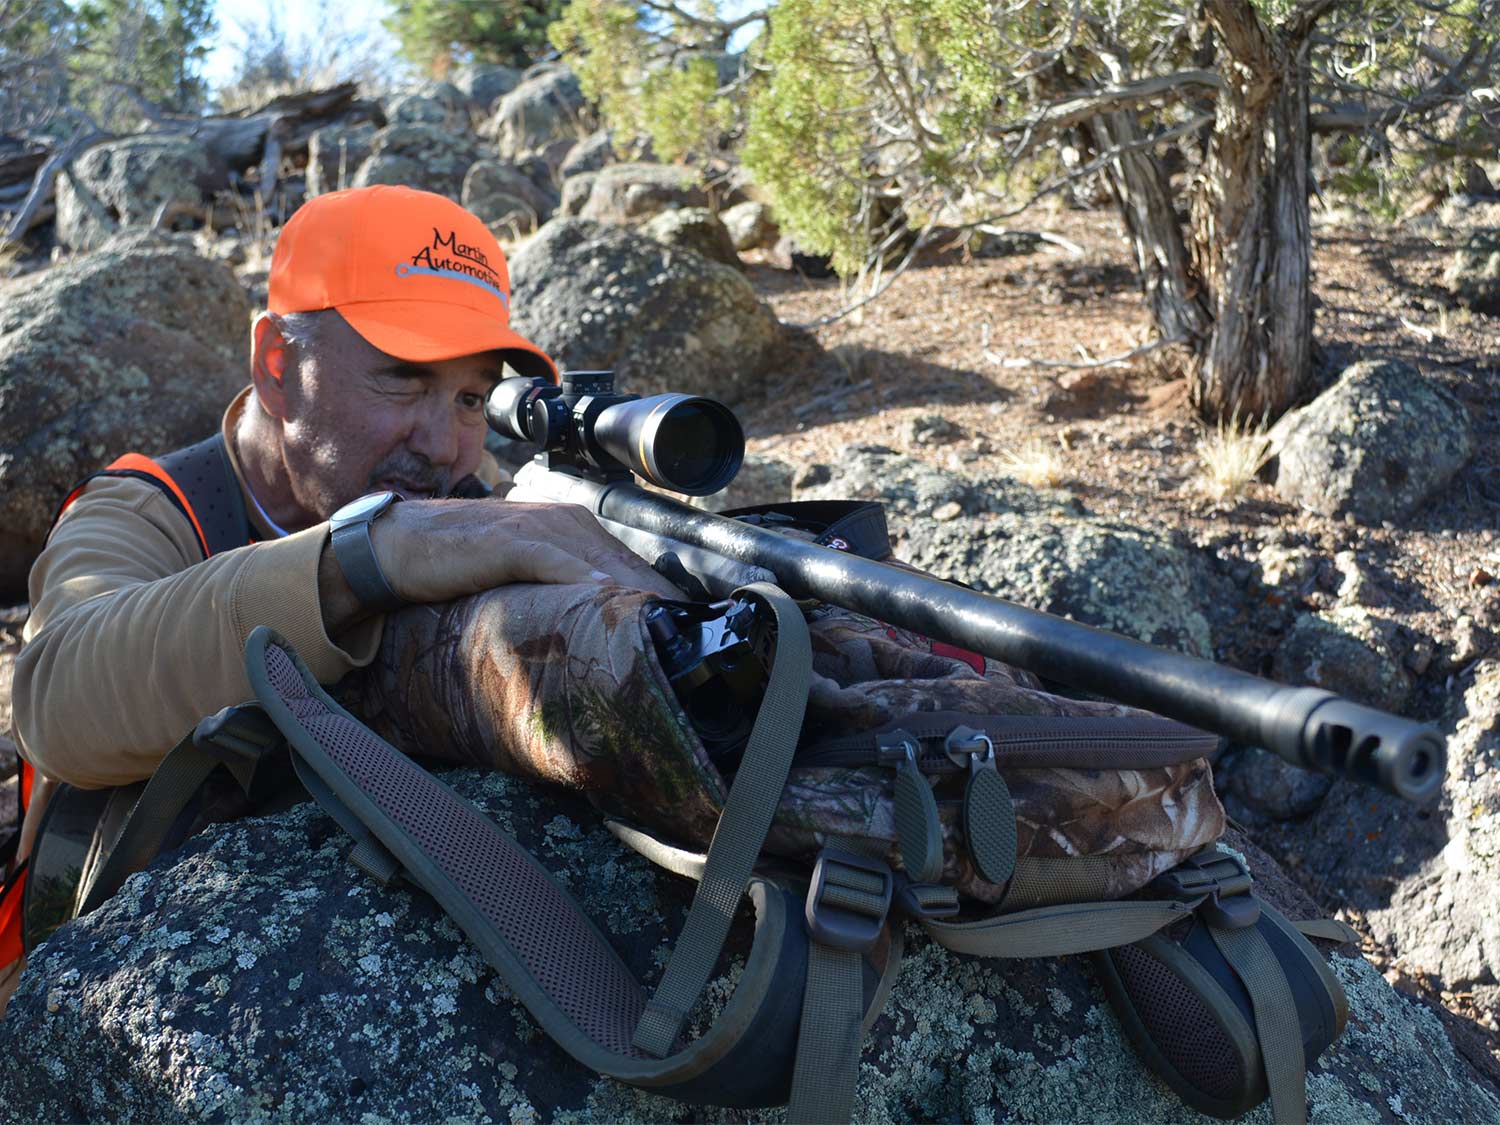 A man aims a rifle in the wilderness.